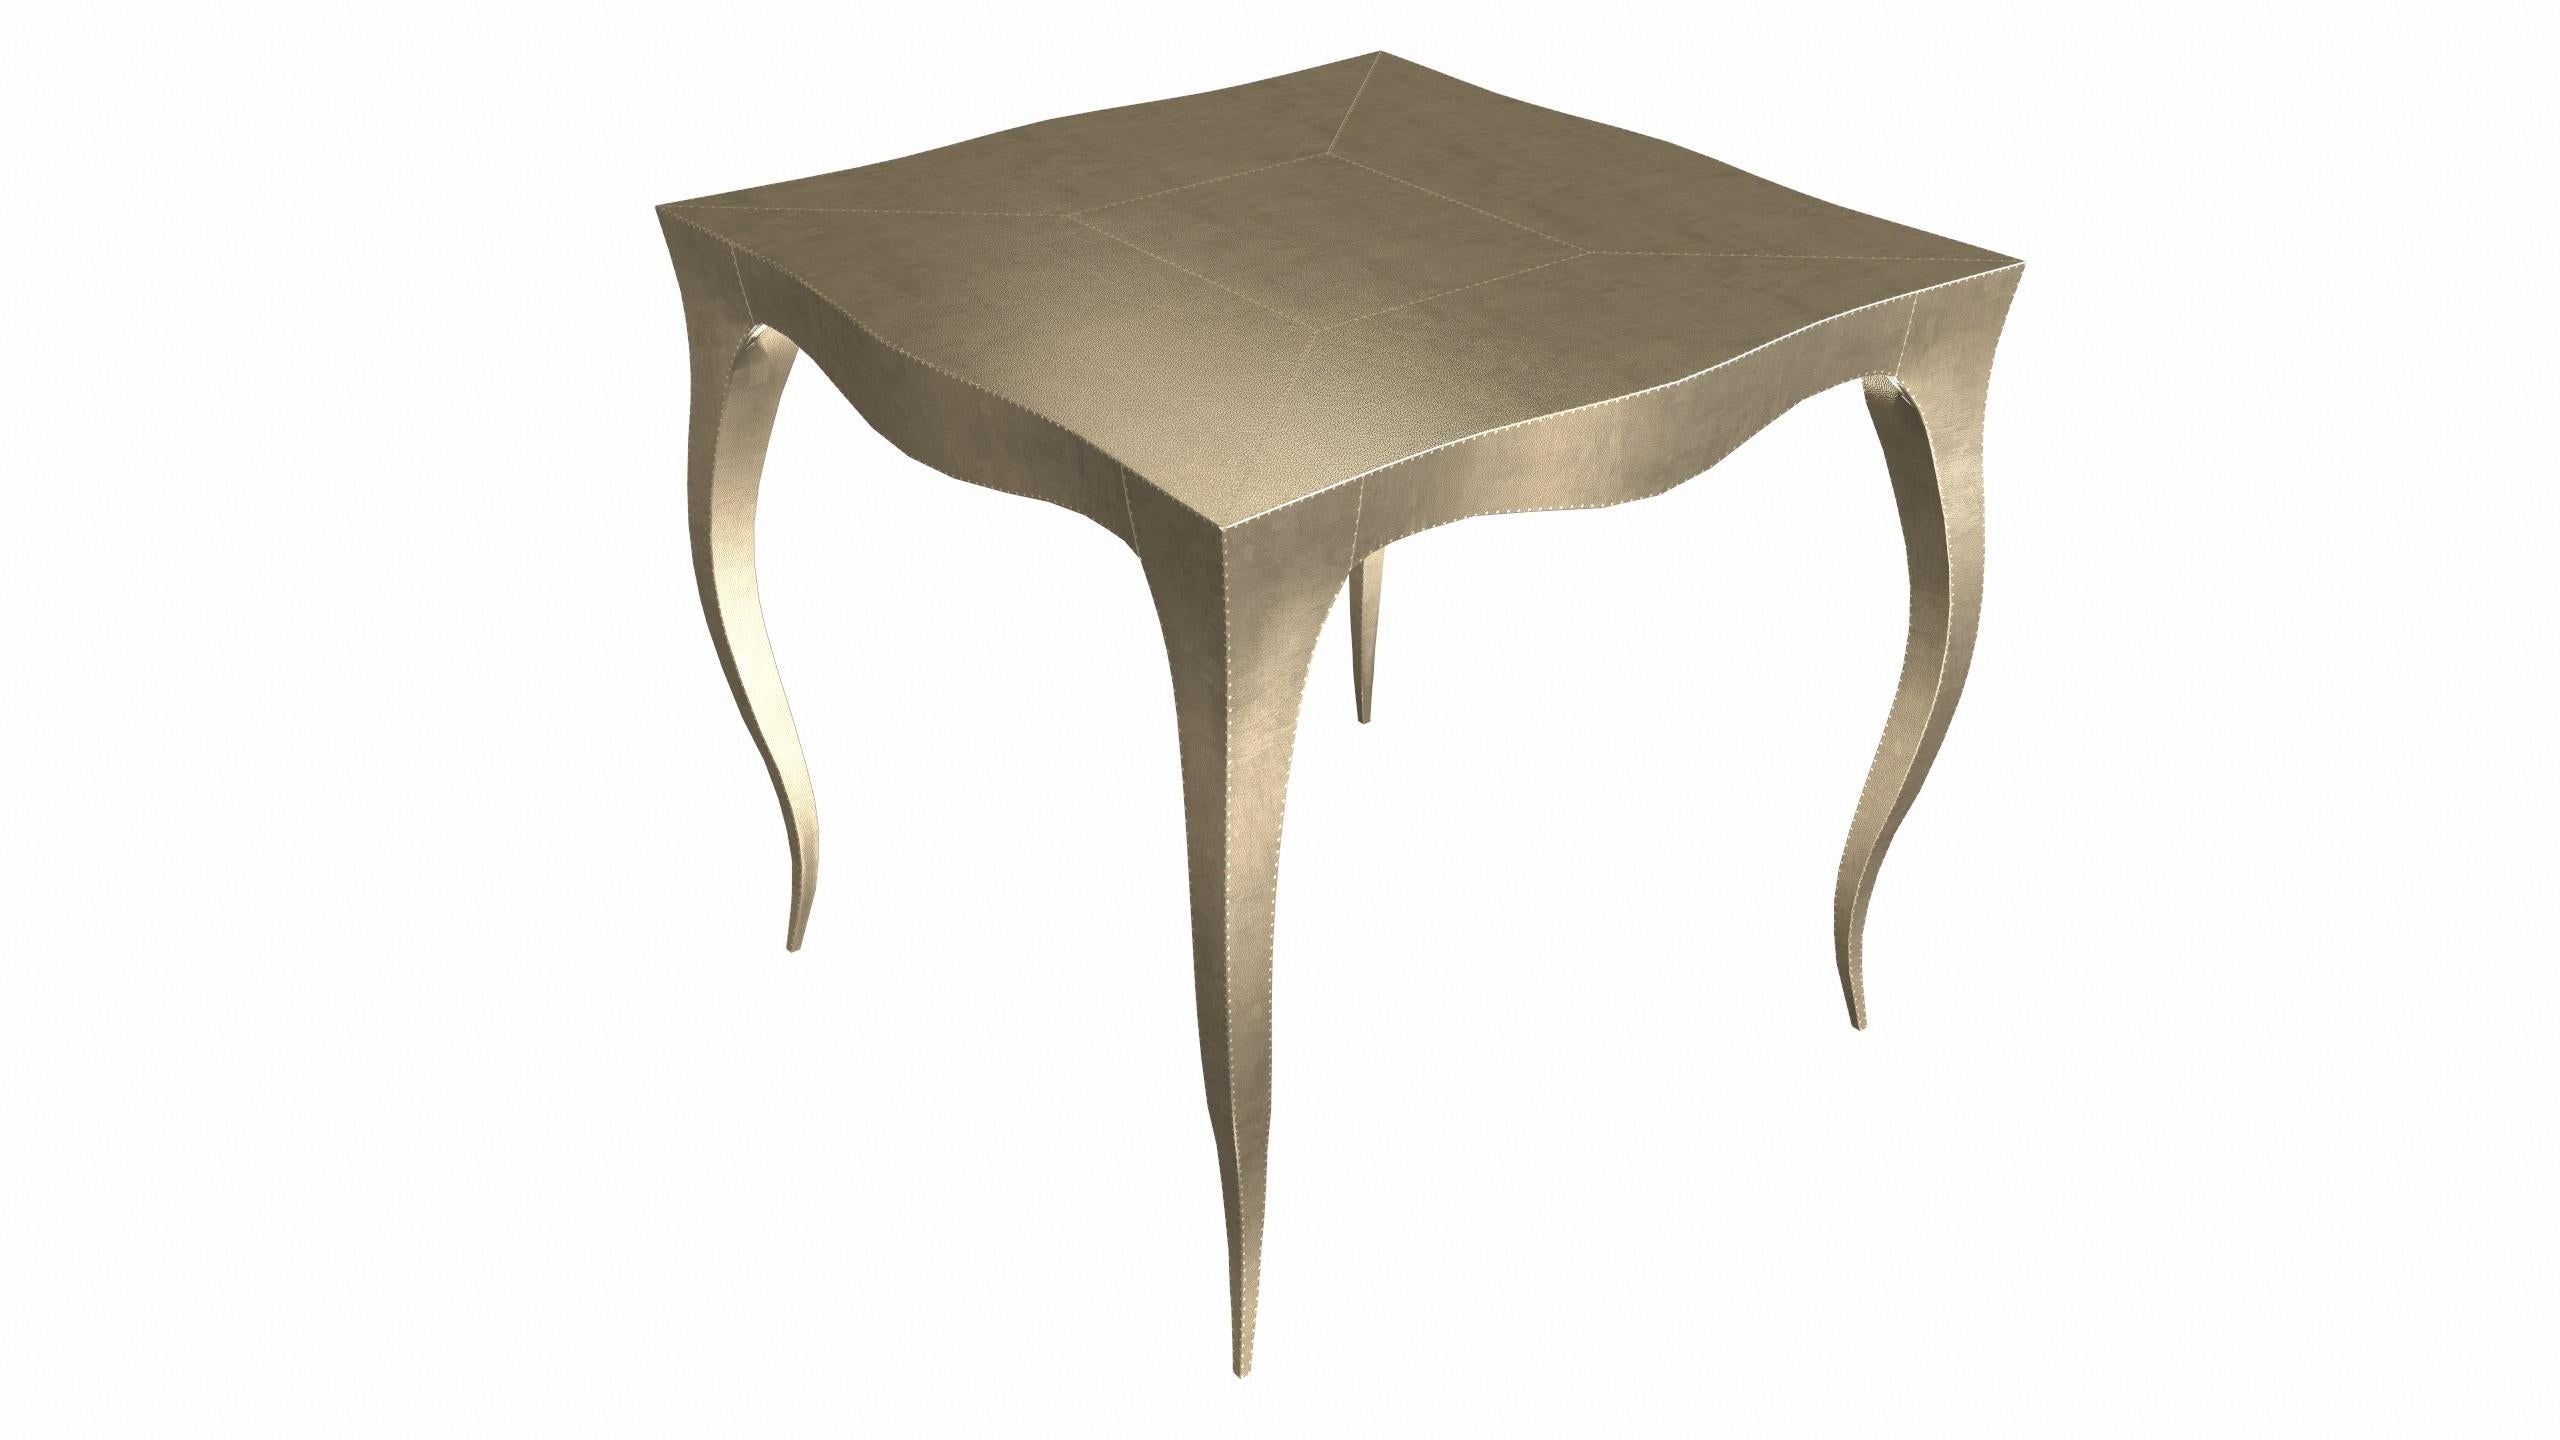 Metal Louise Art Deco Coffee and Cocktail Tables  Mid. Hammered Brass by Paul Mathieu  For Sale